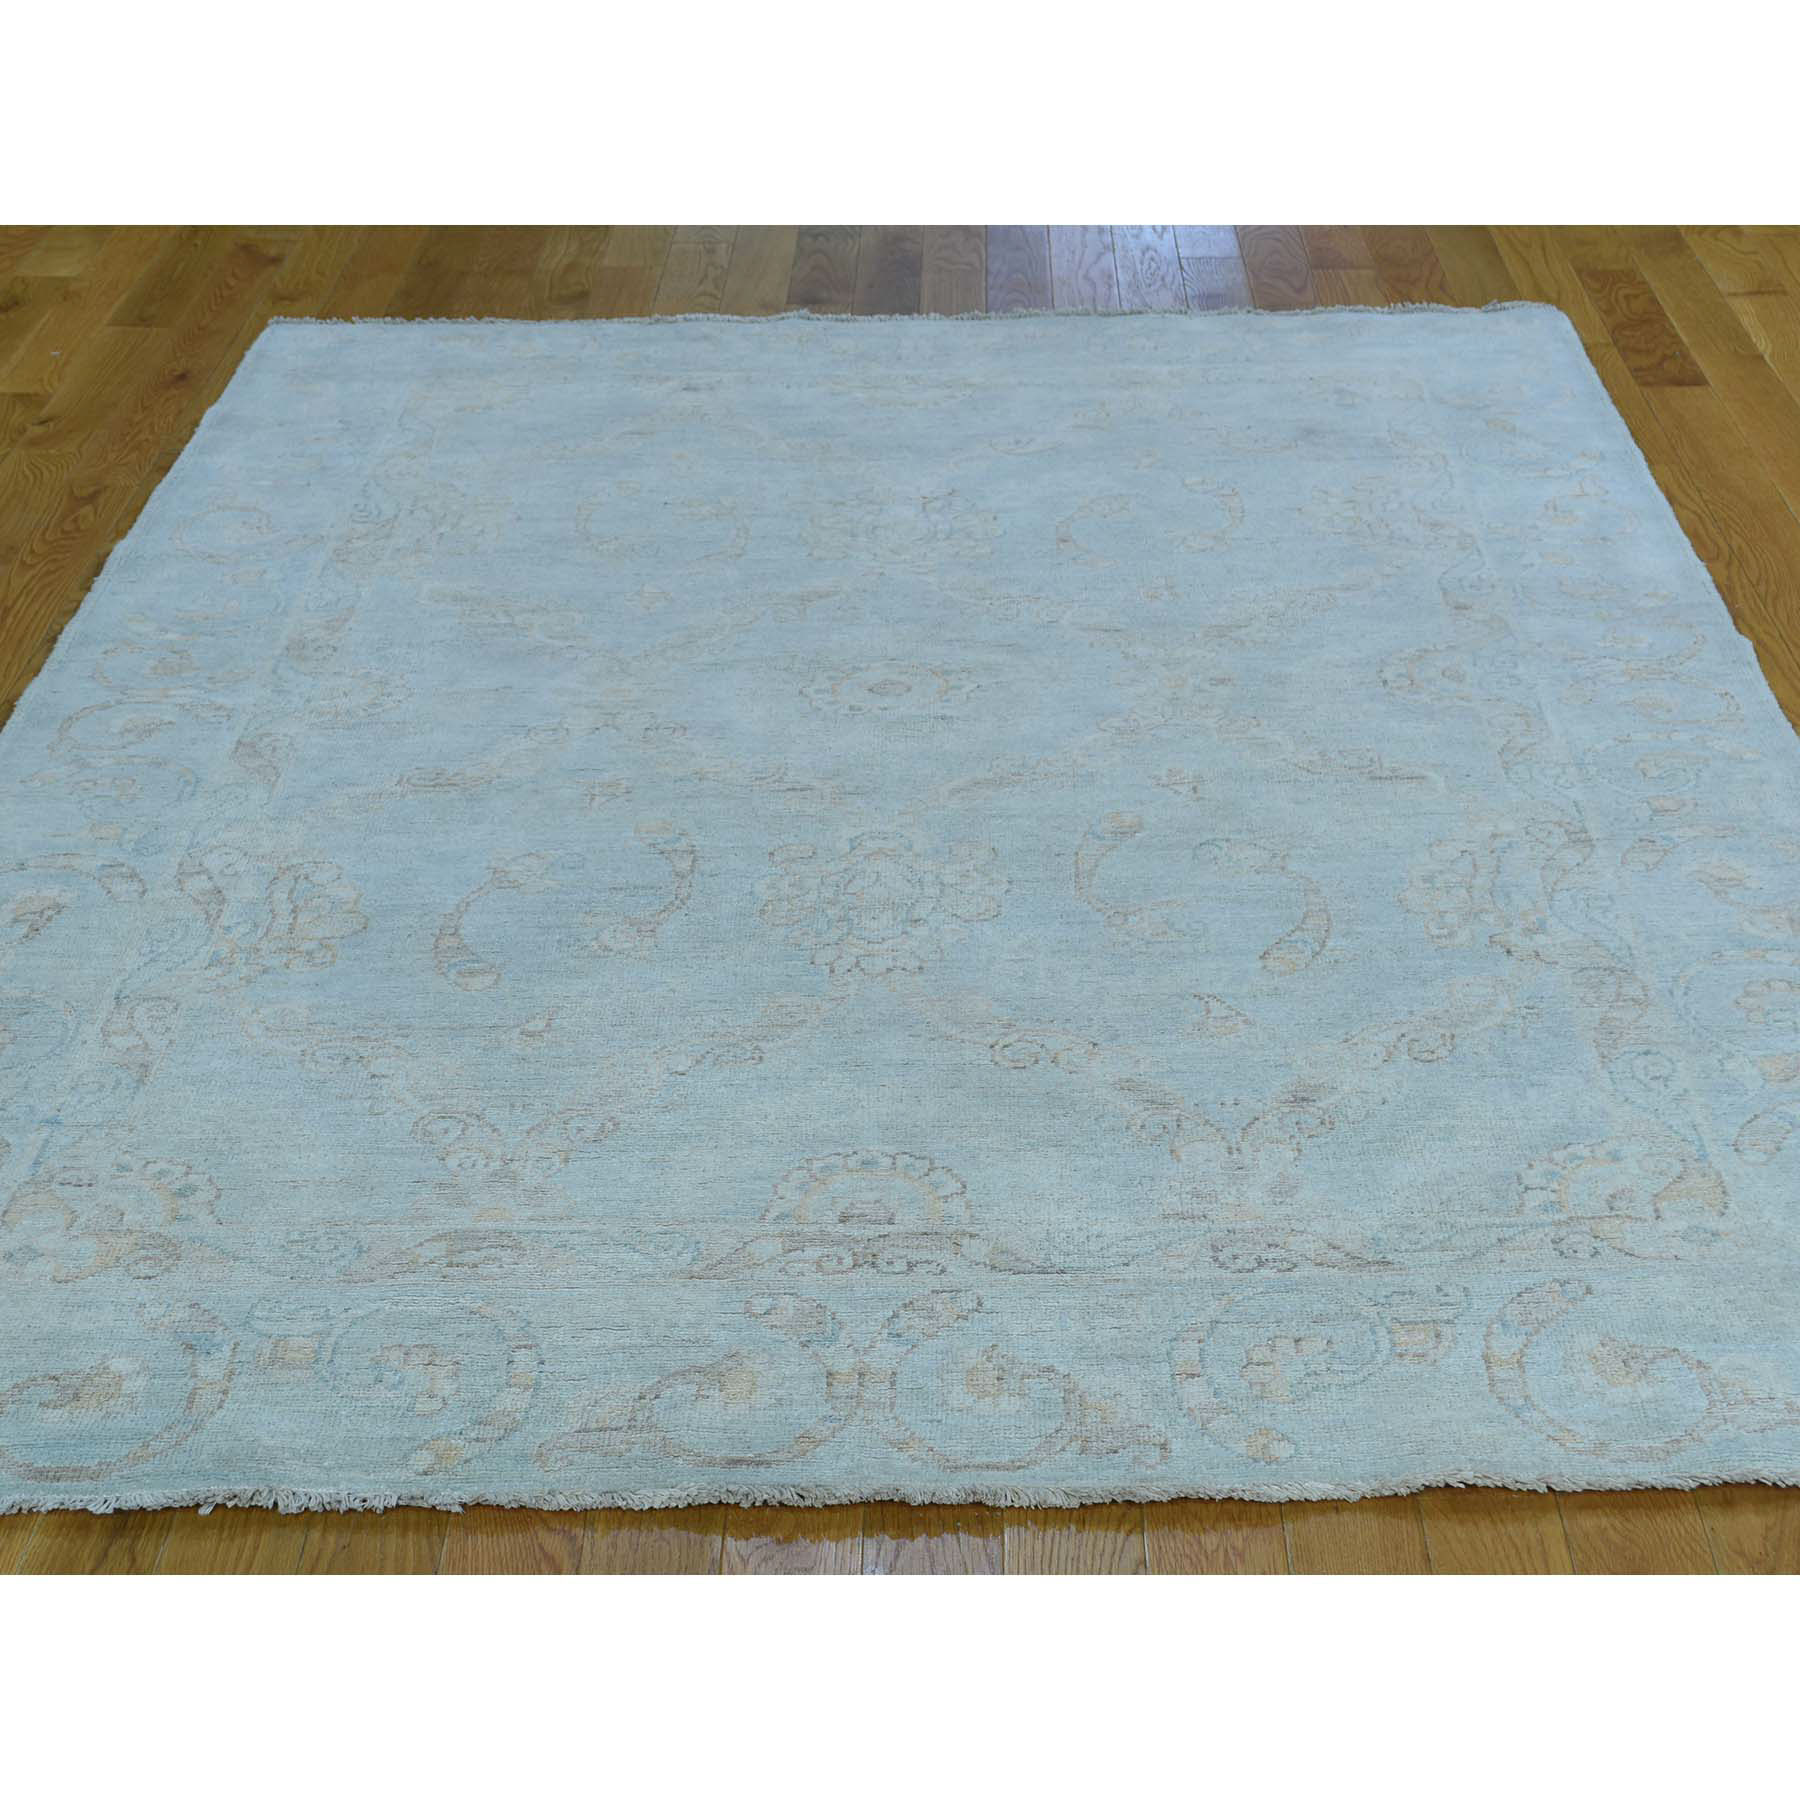 5-2 x7- Pure Wool Hand-Knotted White Wash Peshawar Oriental Rug 